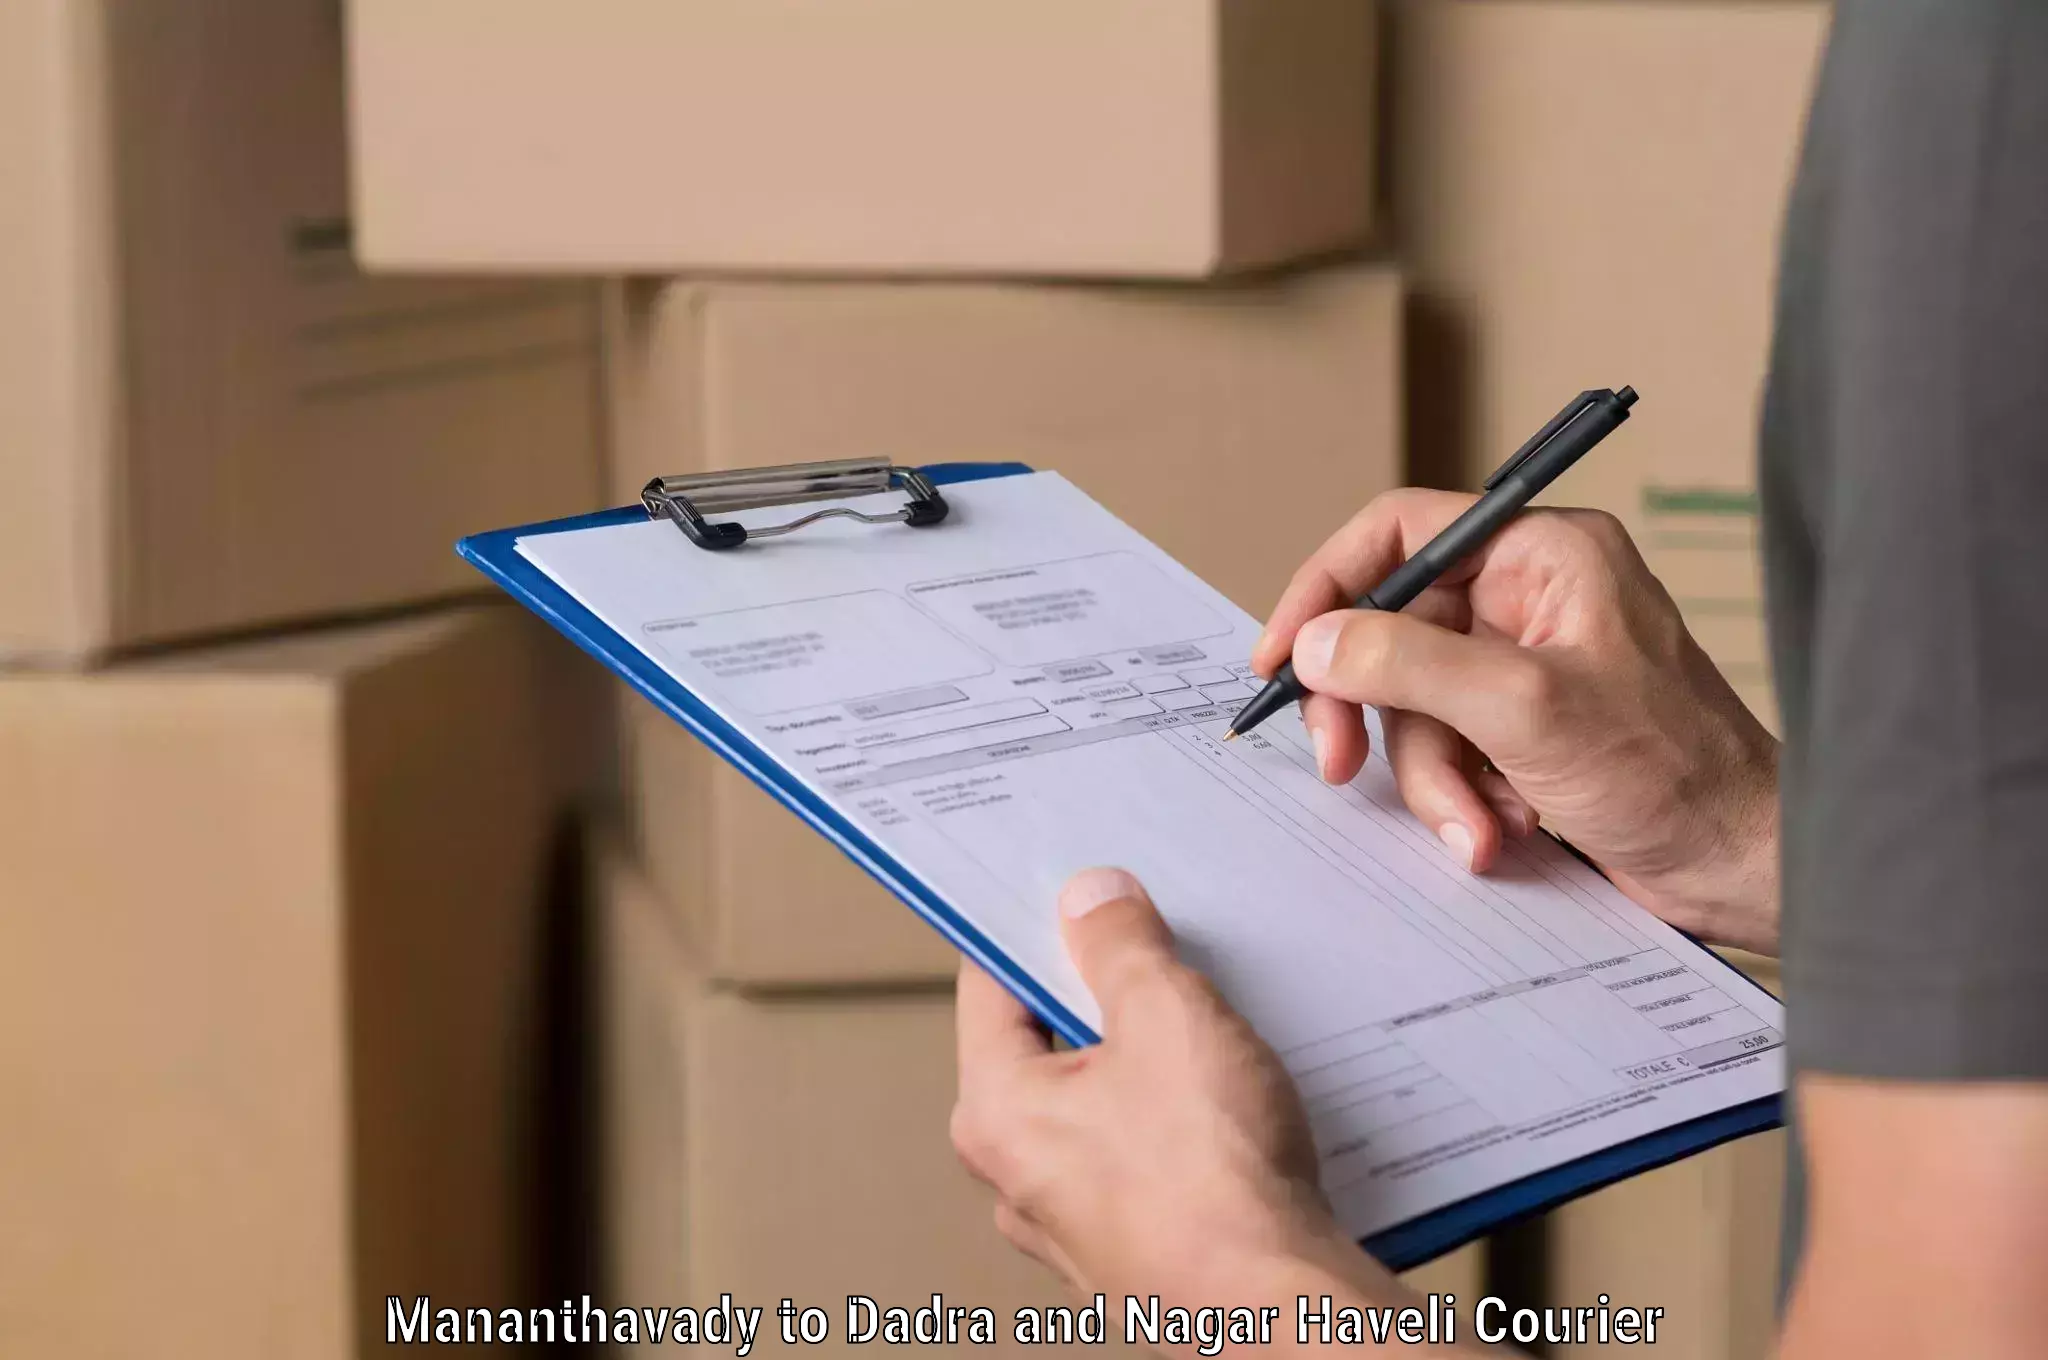 Flexible delivery scheduling Mananthavady to Silvassa